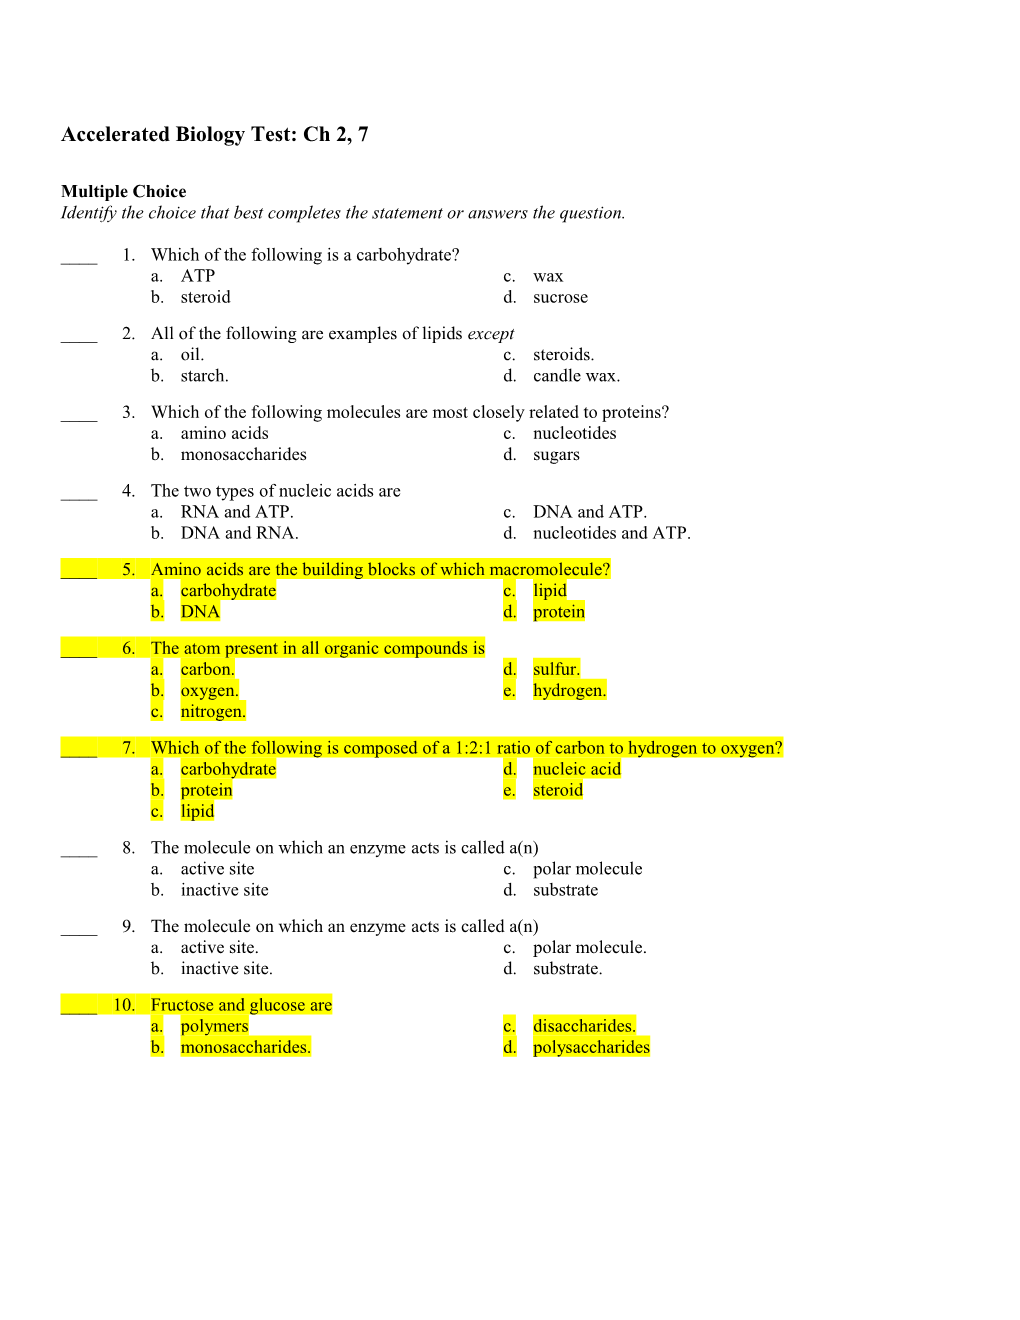 Accelerated Biology Test: Ch 2, 7